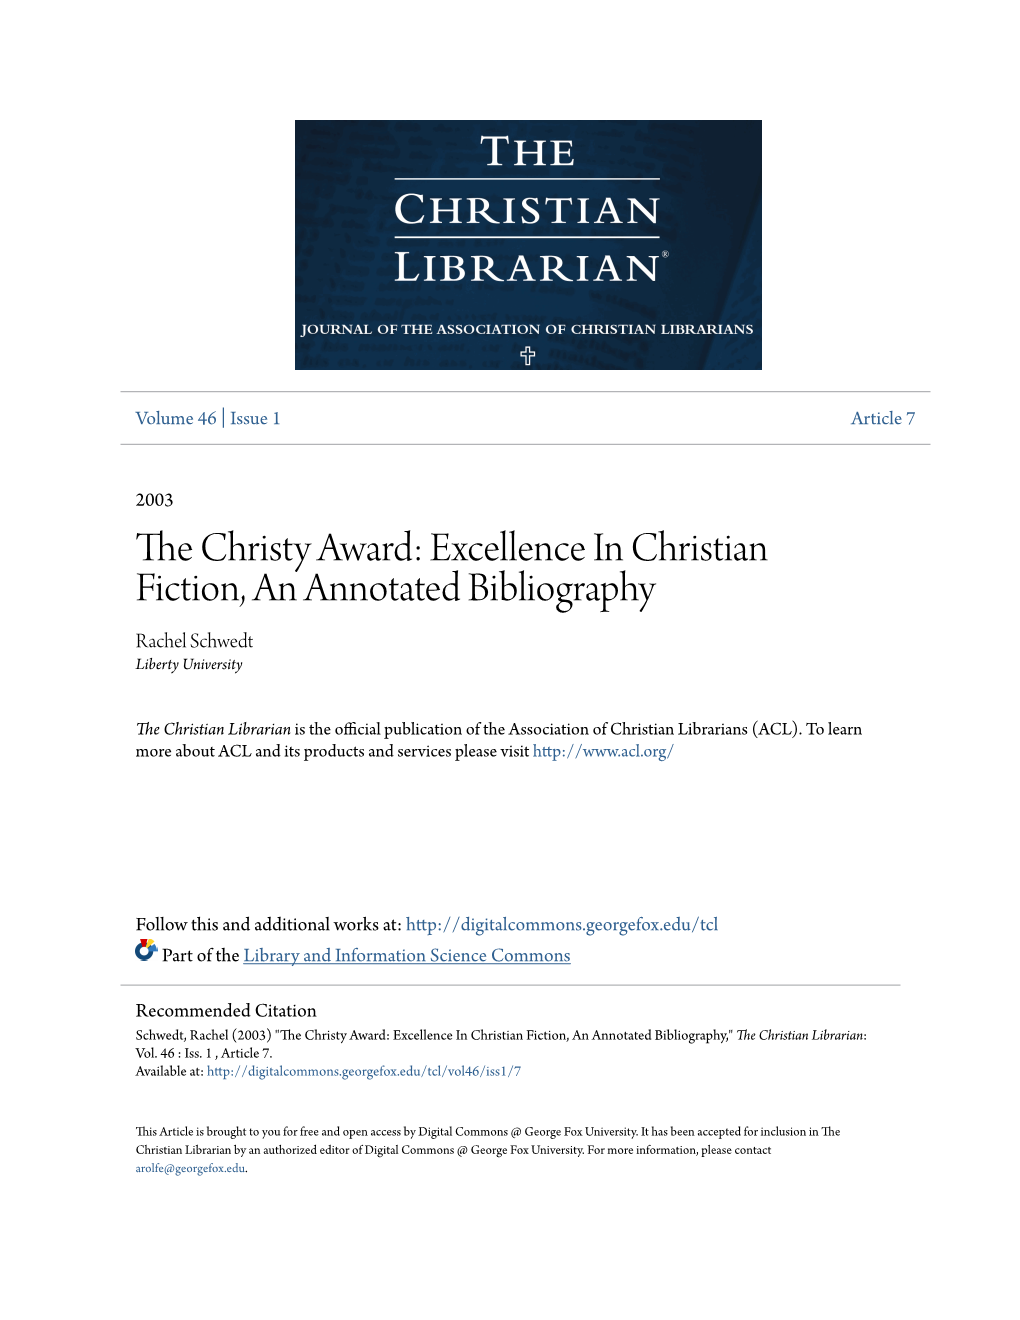 The Christy Award: Excellence in Christian Fiction, an Annotated